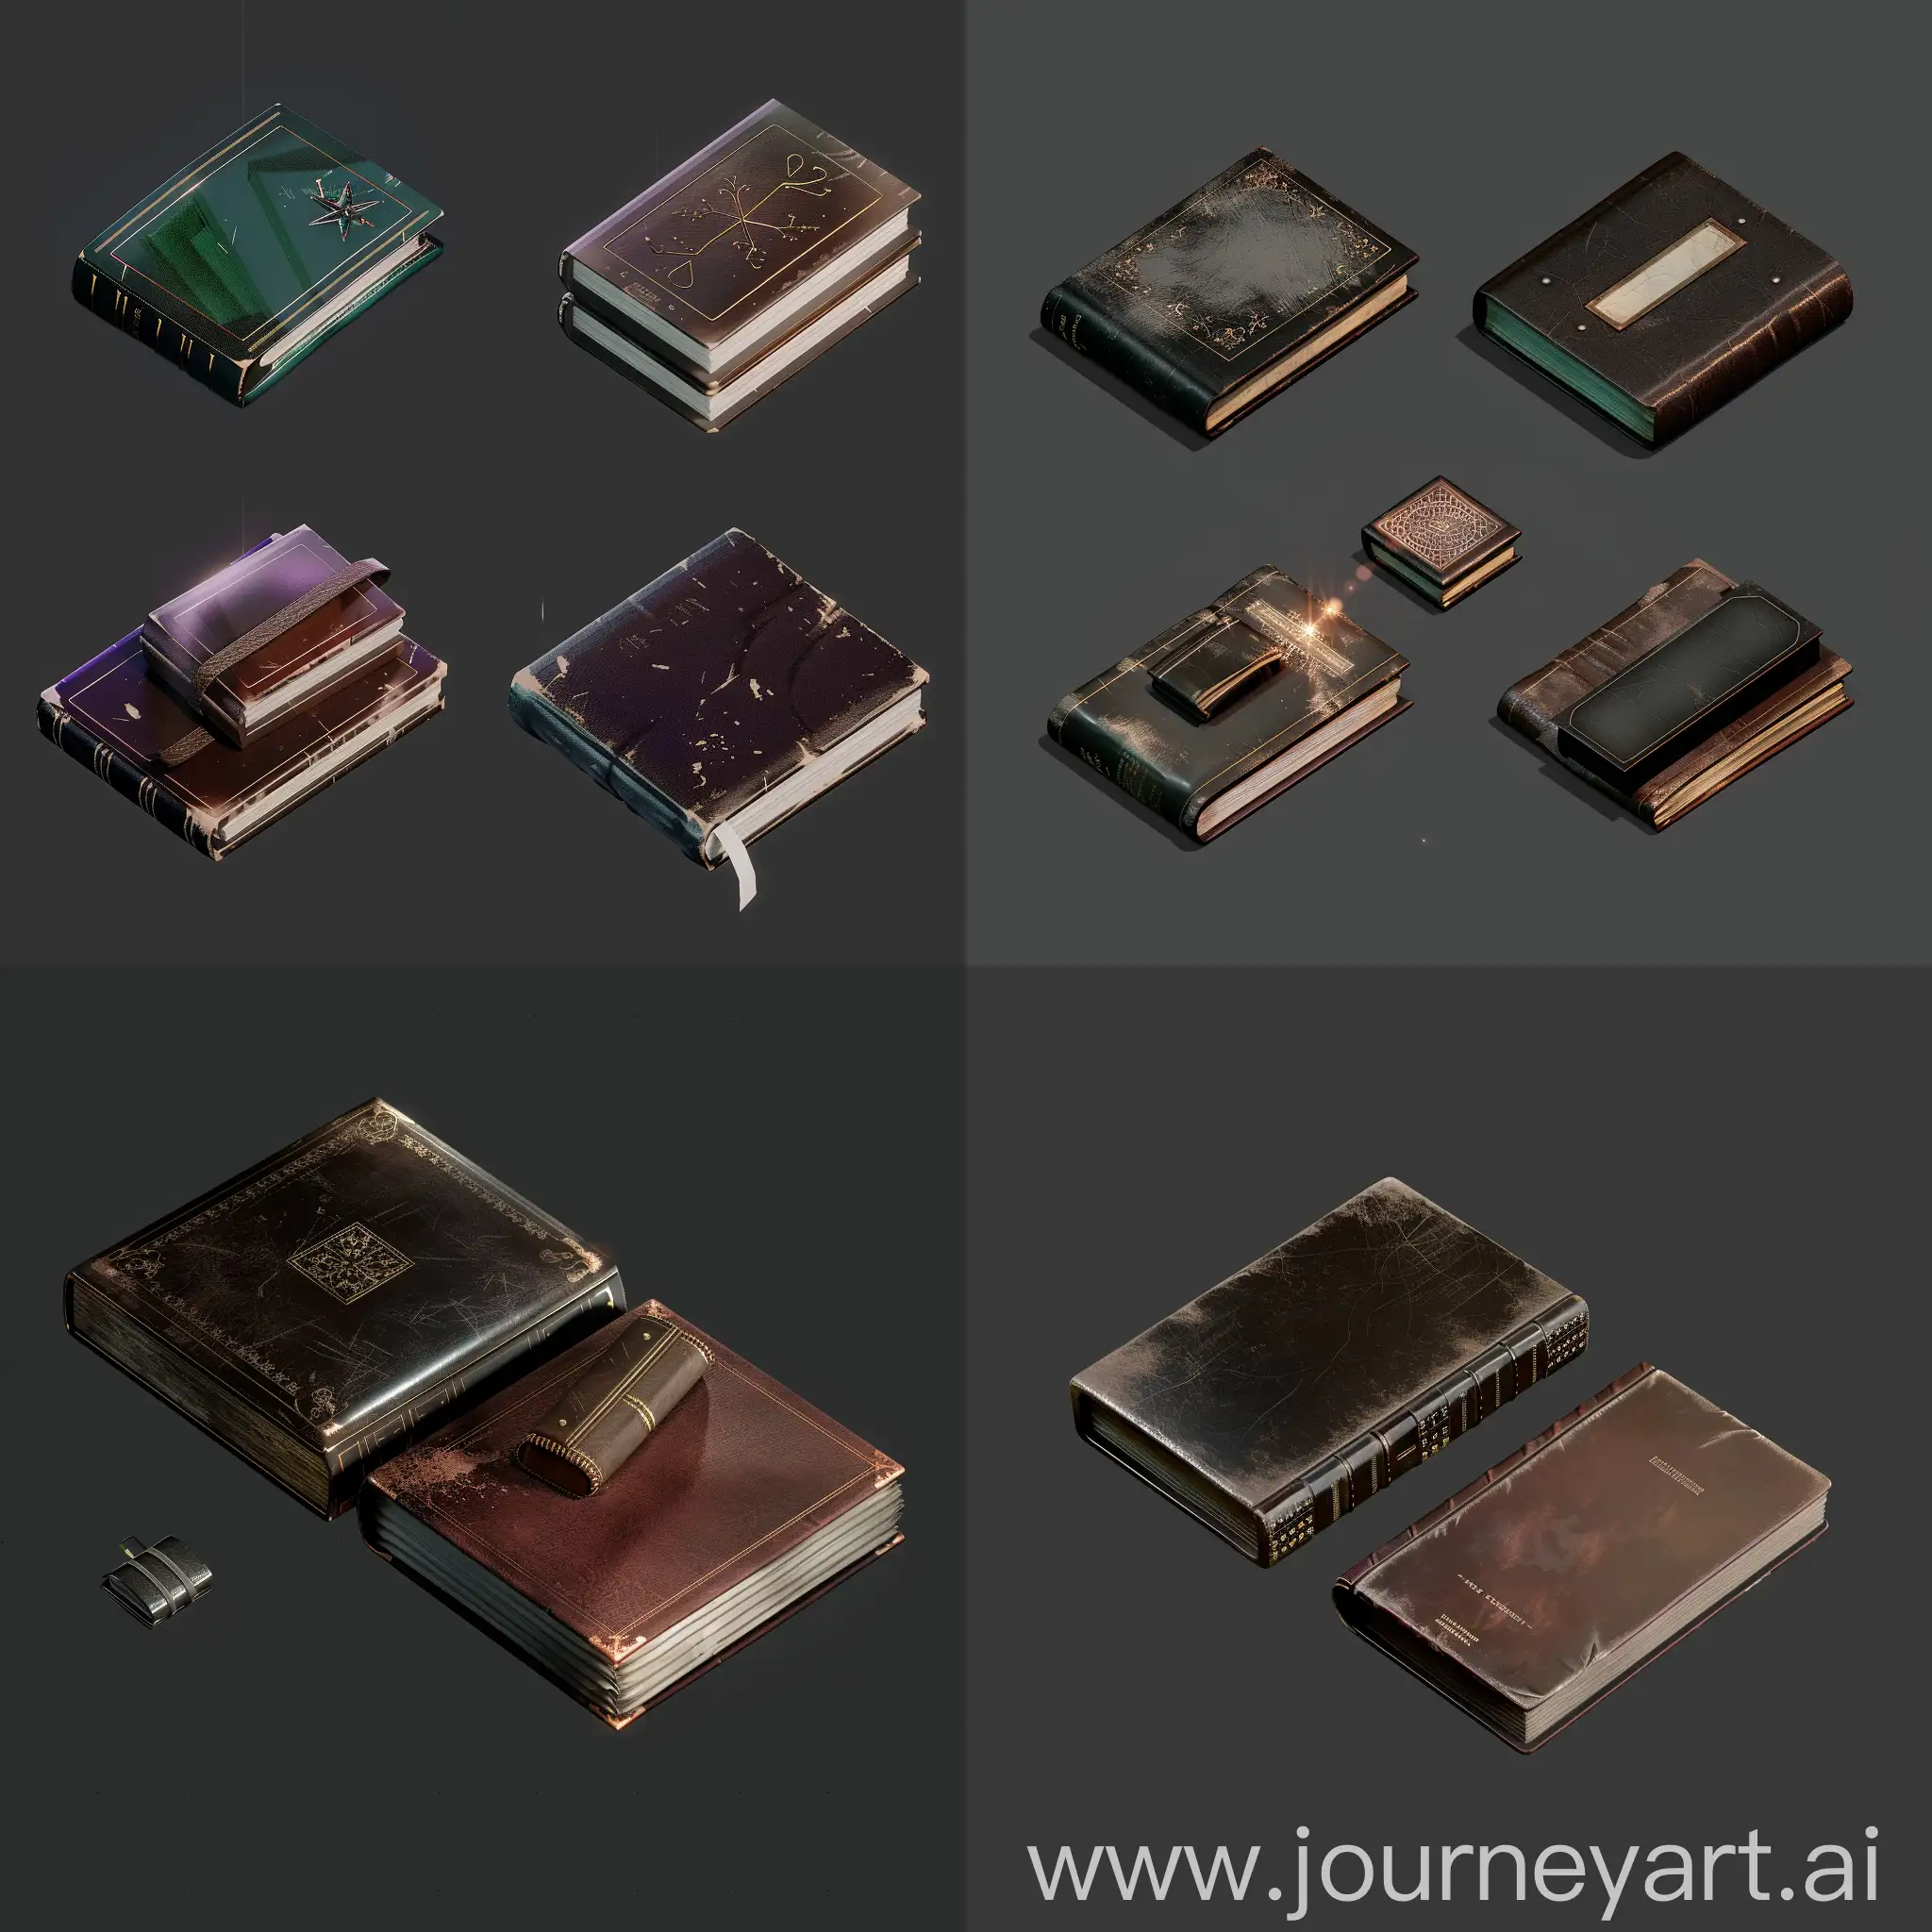 Isometric-Set-of-Old-Worn-Books-Realistic-3D-Game-Asset